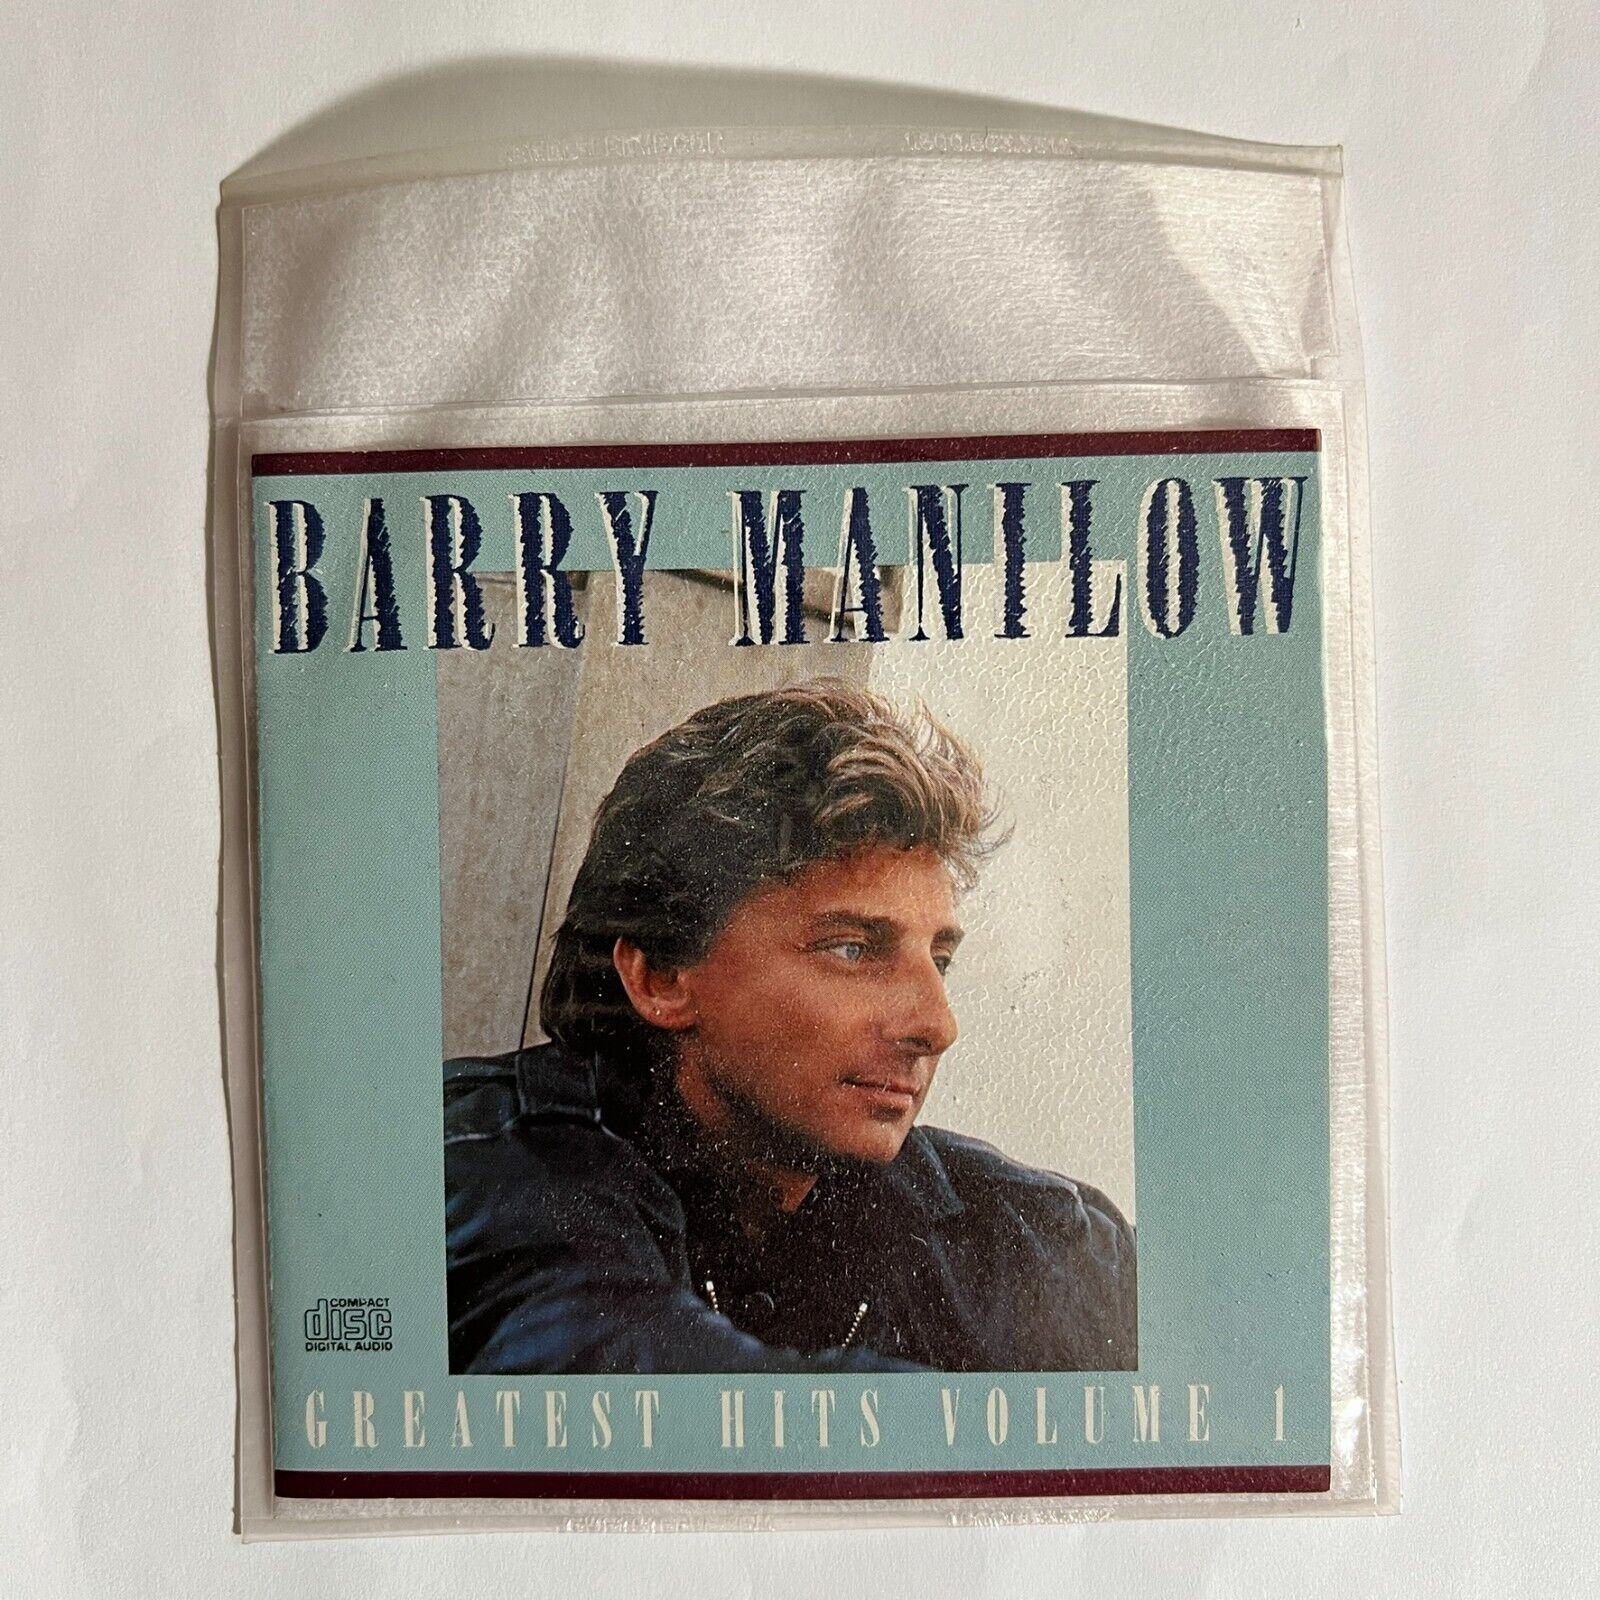 Barry Manilow - Greatest Hits Volume 1 CD with vinyl sleeve